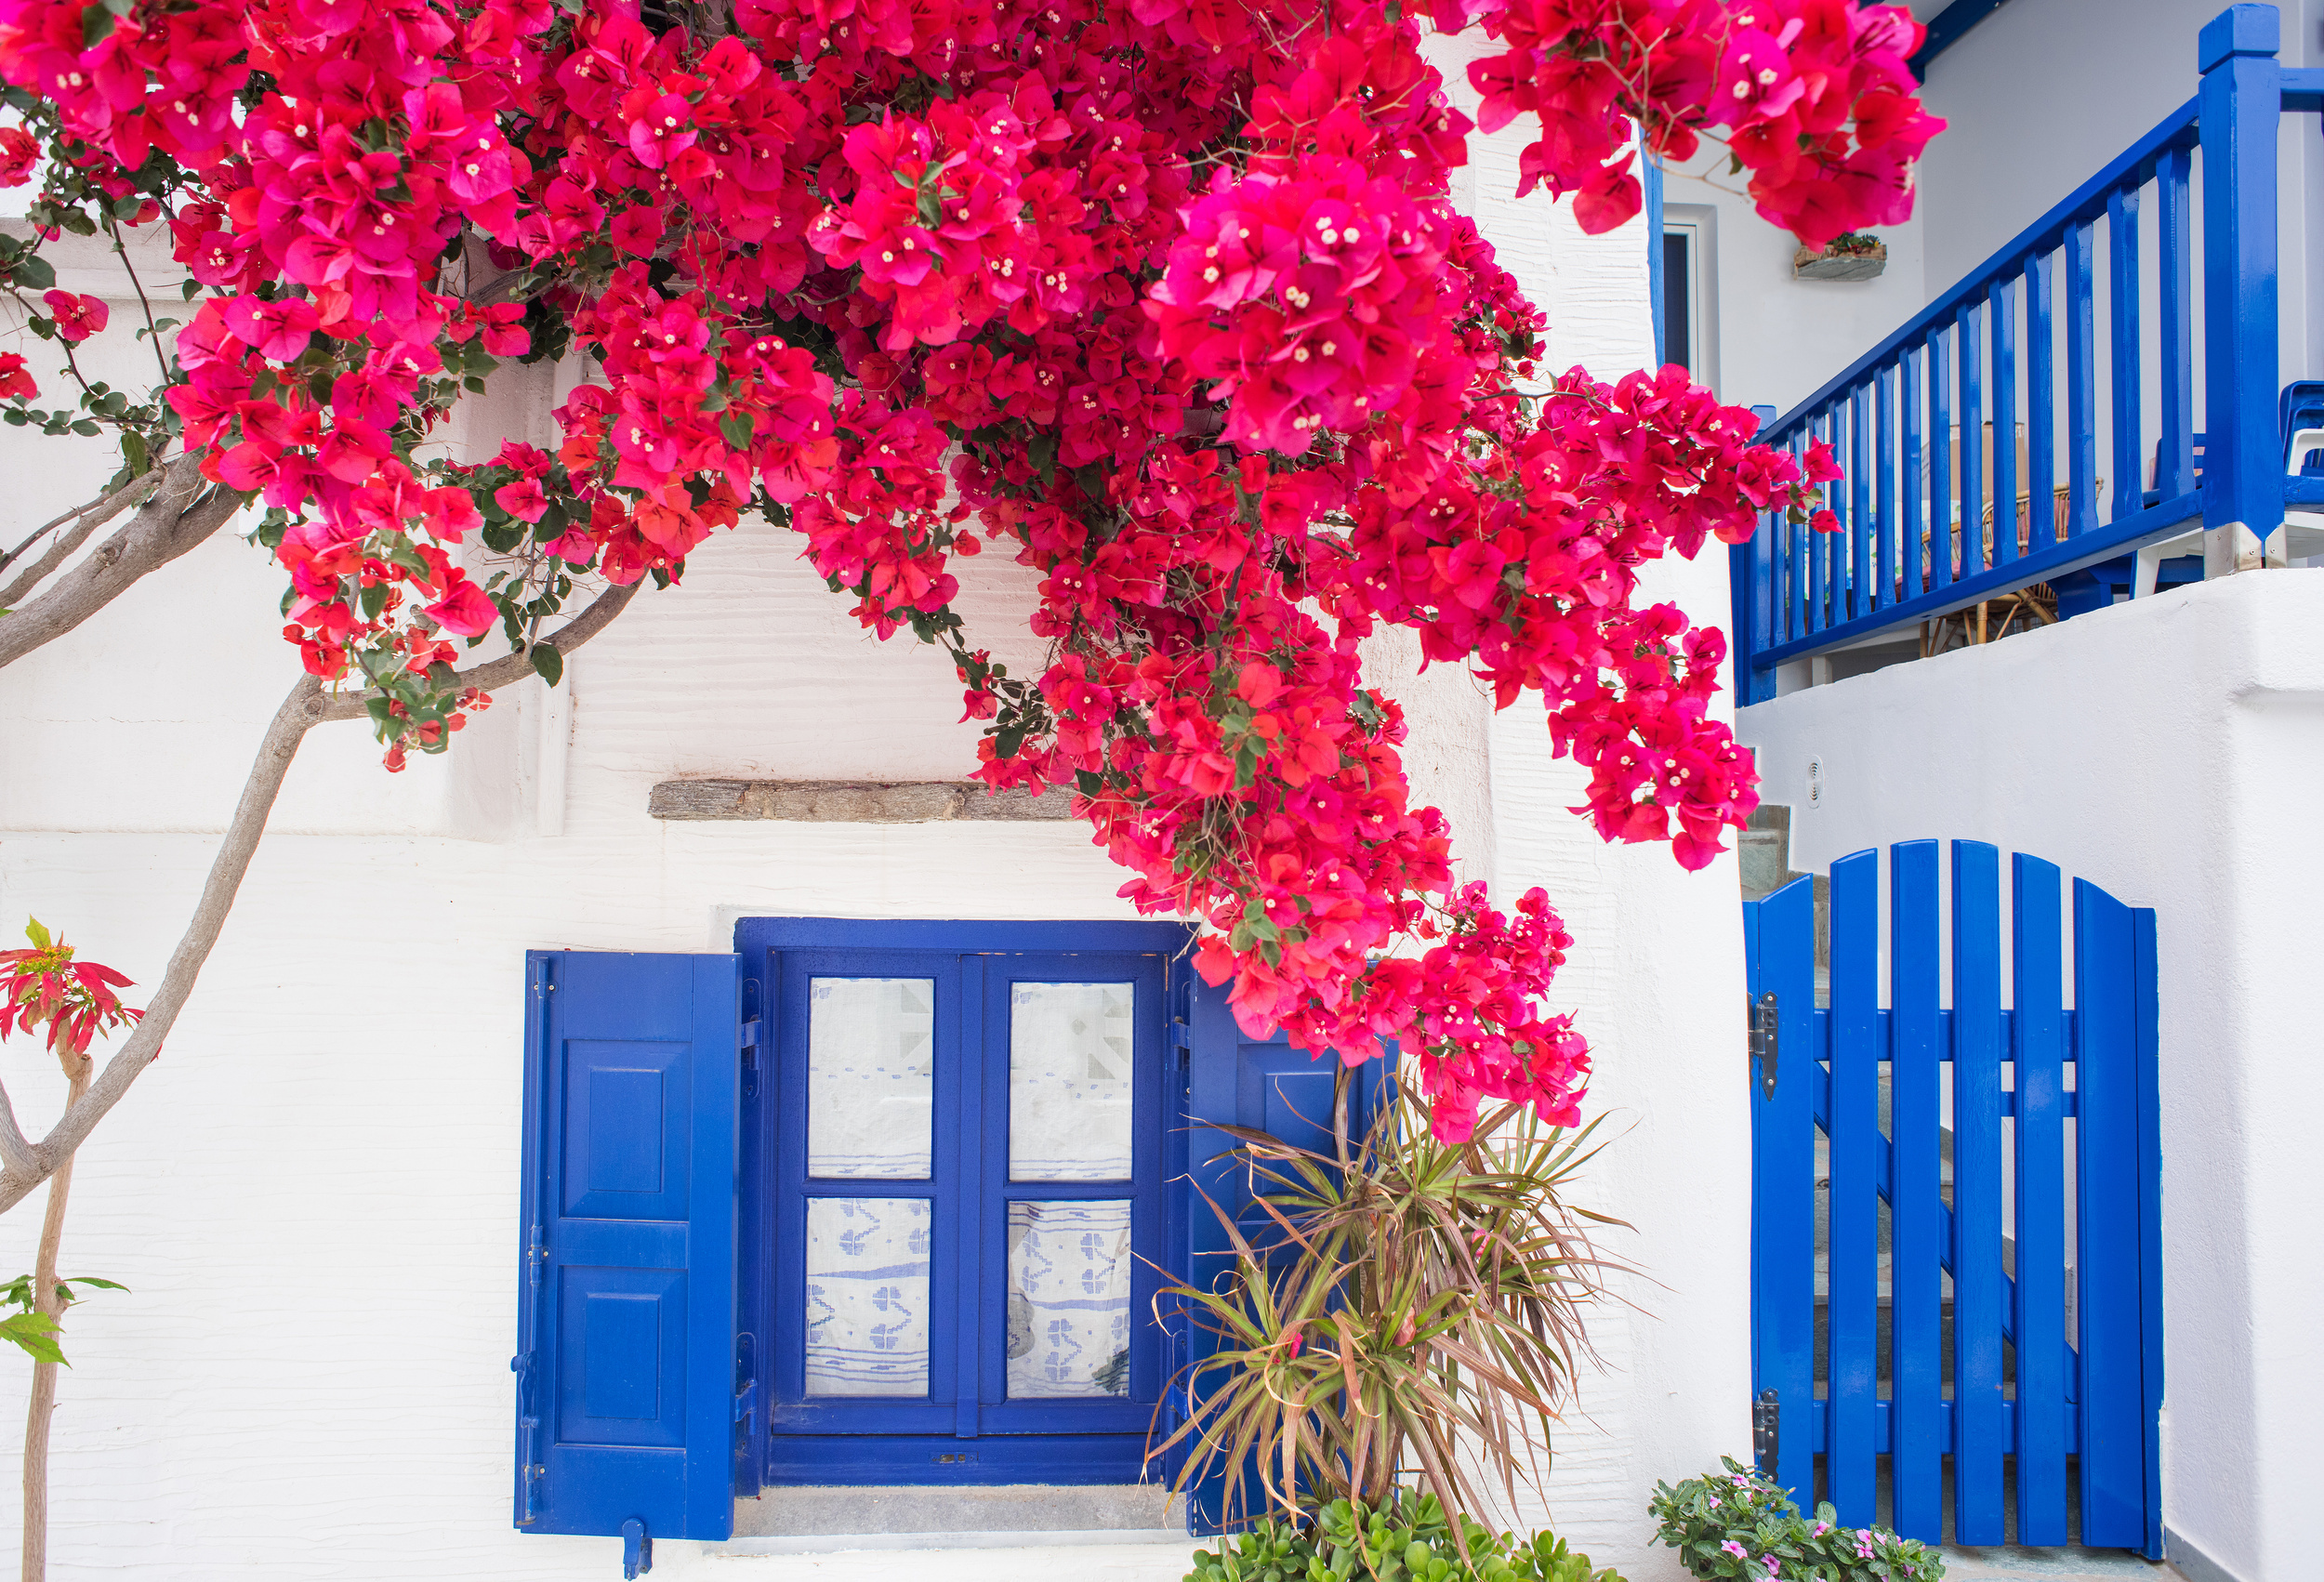 <p>The Greek islands are best known for whitewashed houses, pristine beaches, and some of the bluest water you’ll ever see. However, starting in May, bougainvillea flowers paint the country a vibrant violet. This is especially true in the Cyclades Islands, which include Santorini and Mykonos.</p><p>You may also like: <a href='https://www.yardbarker.com/lifestyle/articles/20_spinach_recipes_you_absolutely_must_try/s1__39117830'>20 spinach recipes you absolutely must try</a></p>